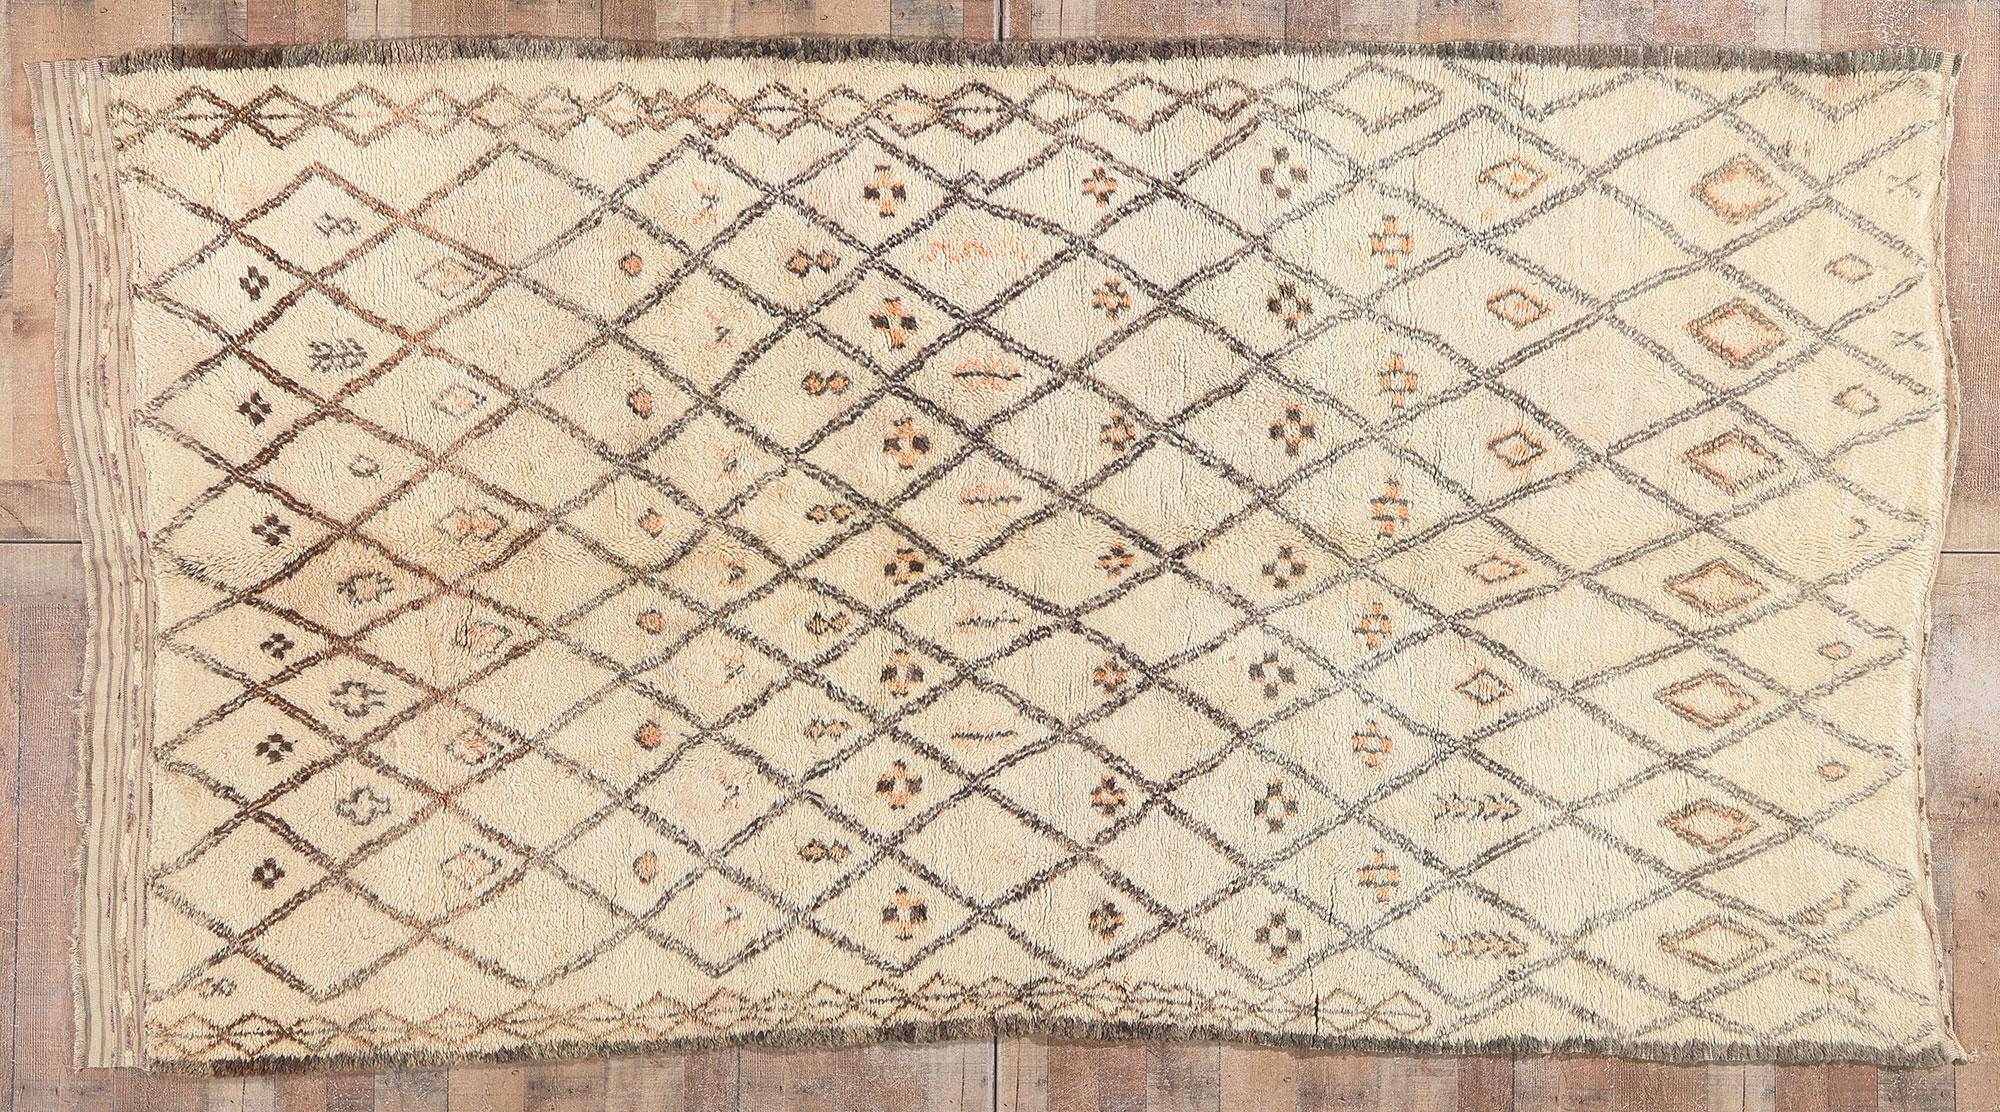 Vintage Moroccan Beni Ourain Rug, Midcentury Modern Style Meets Shibui For Sale 2